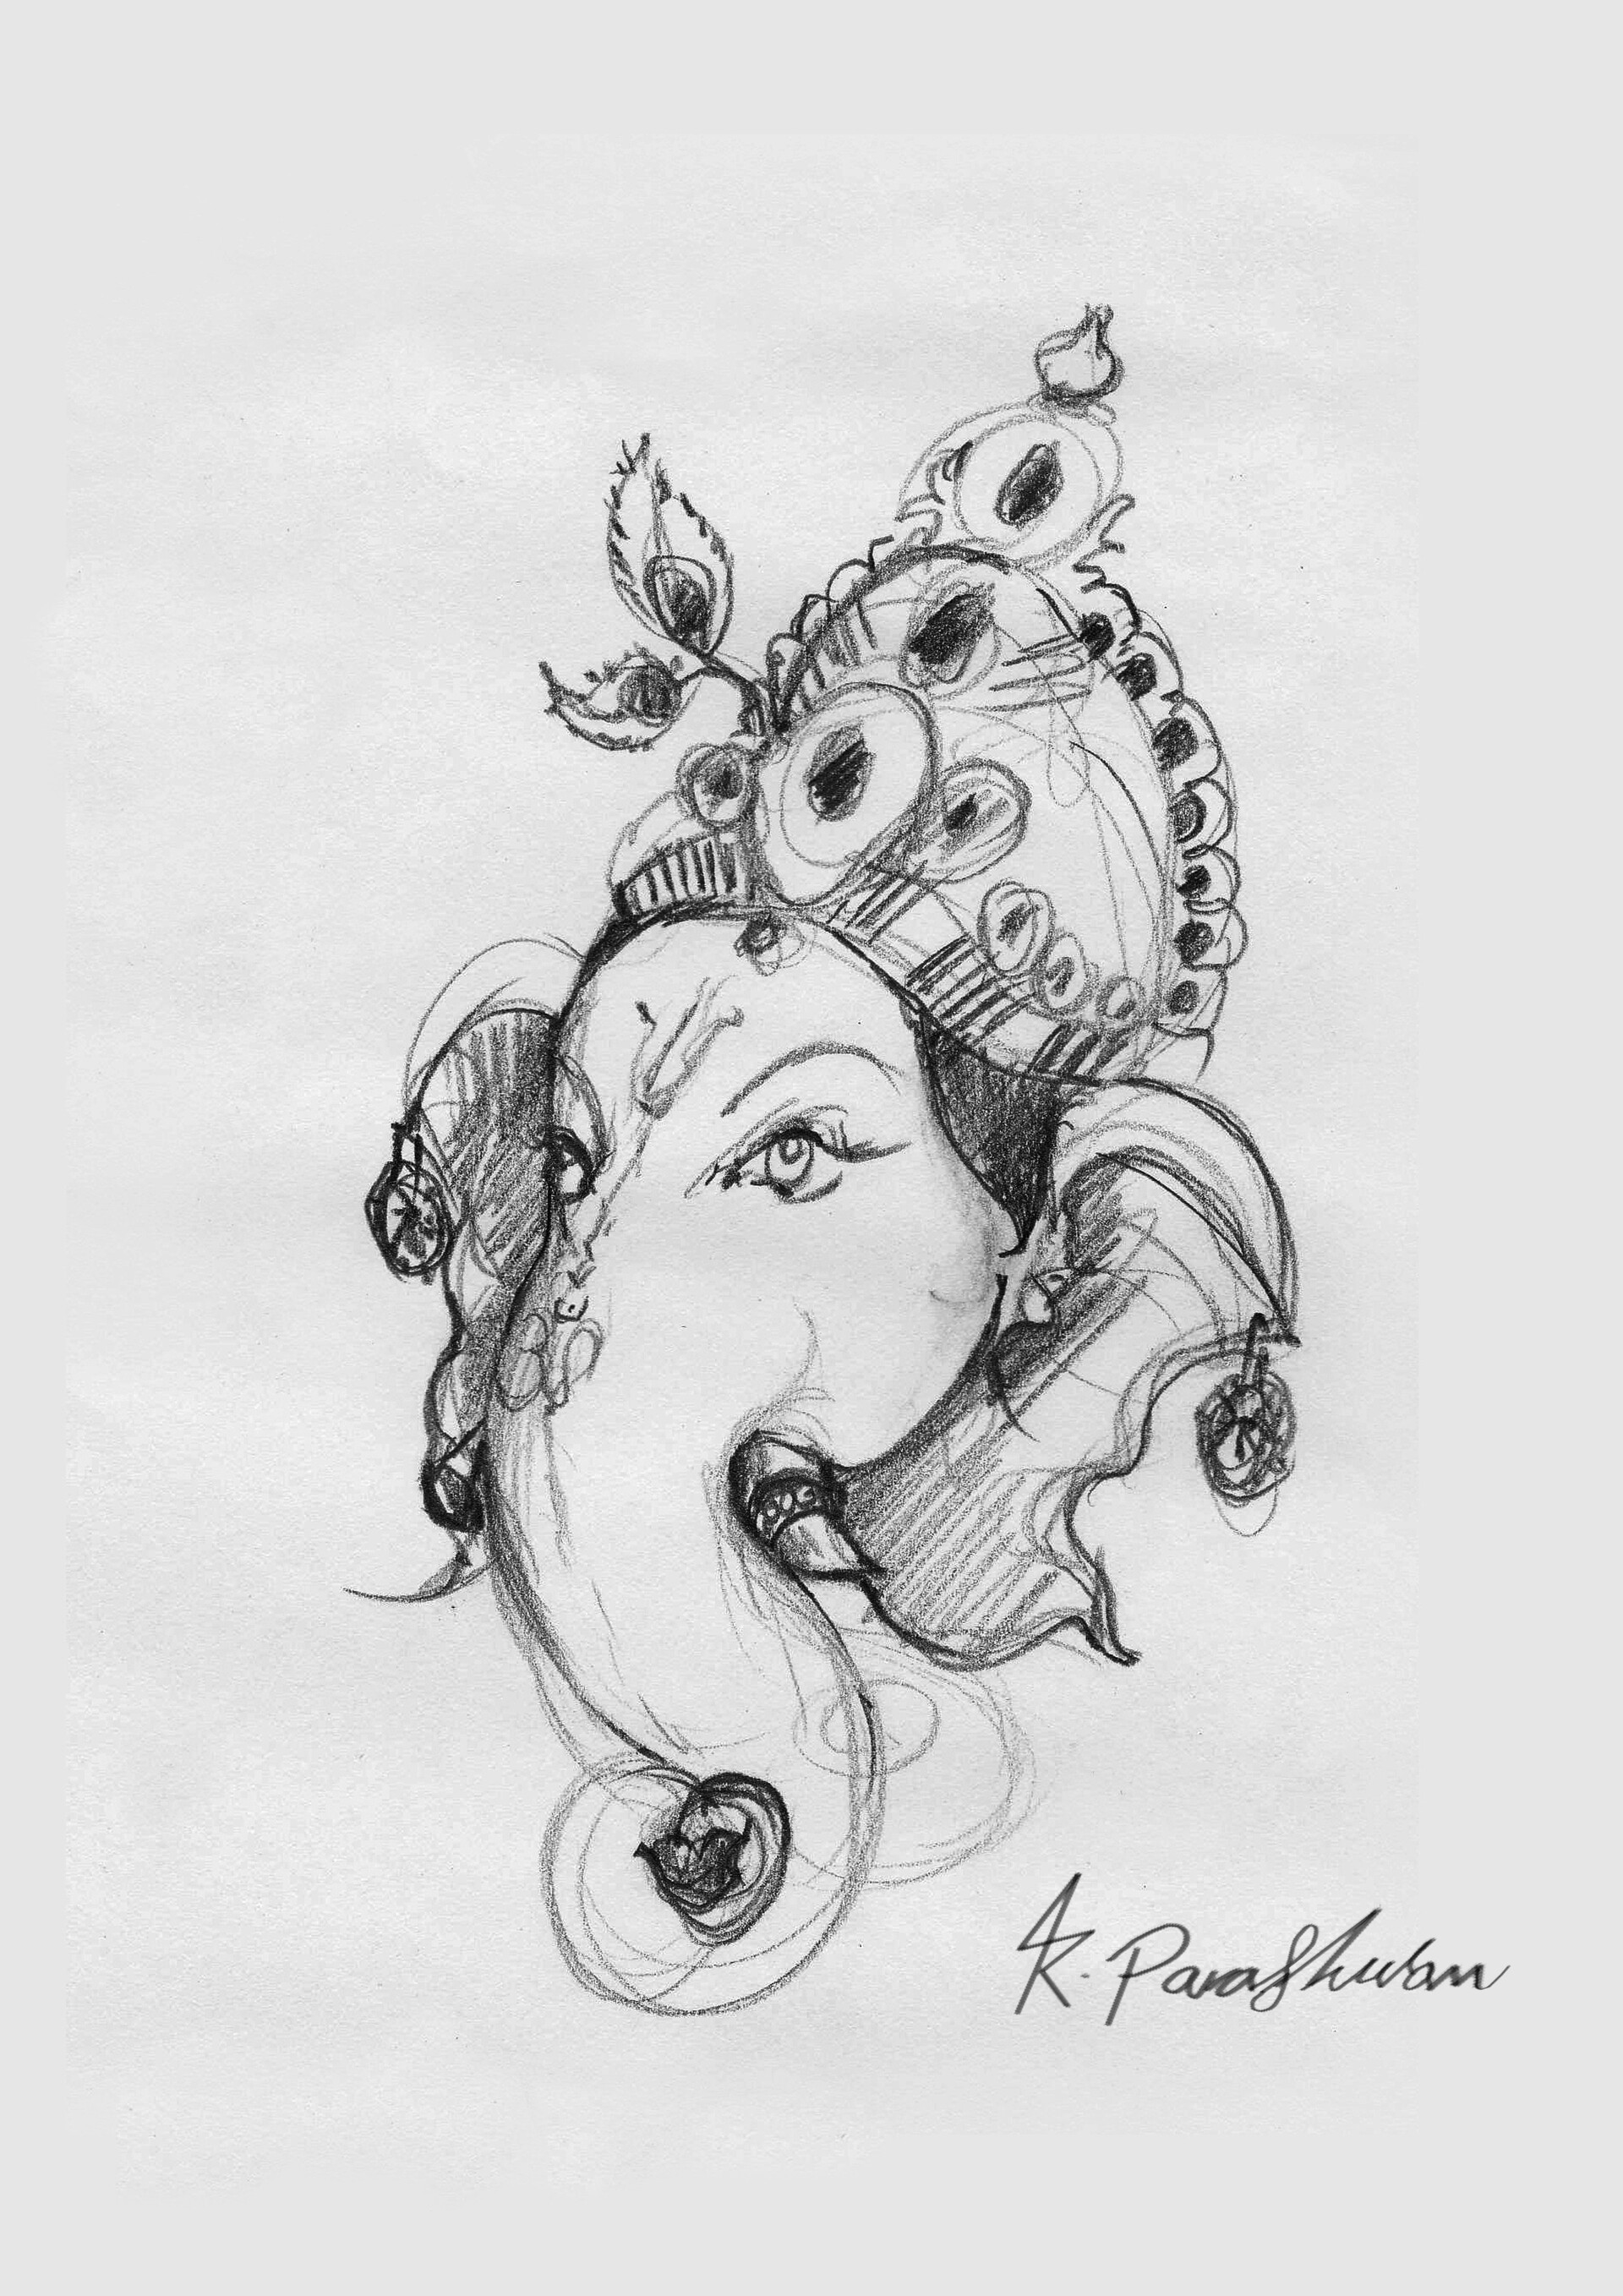 Ganesha Painting Stock Photos and Pictures - 3,465 Images | Shutterstock